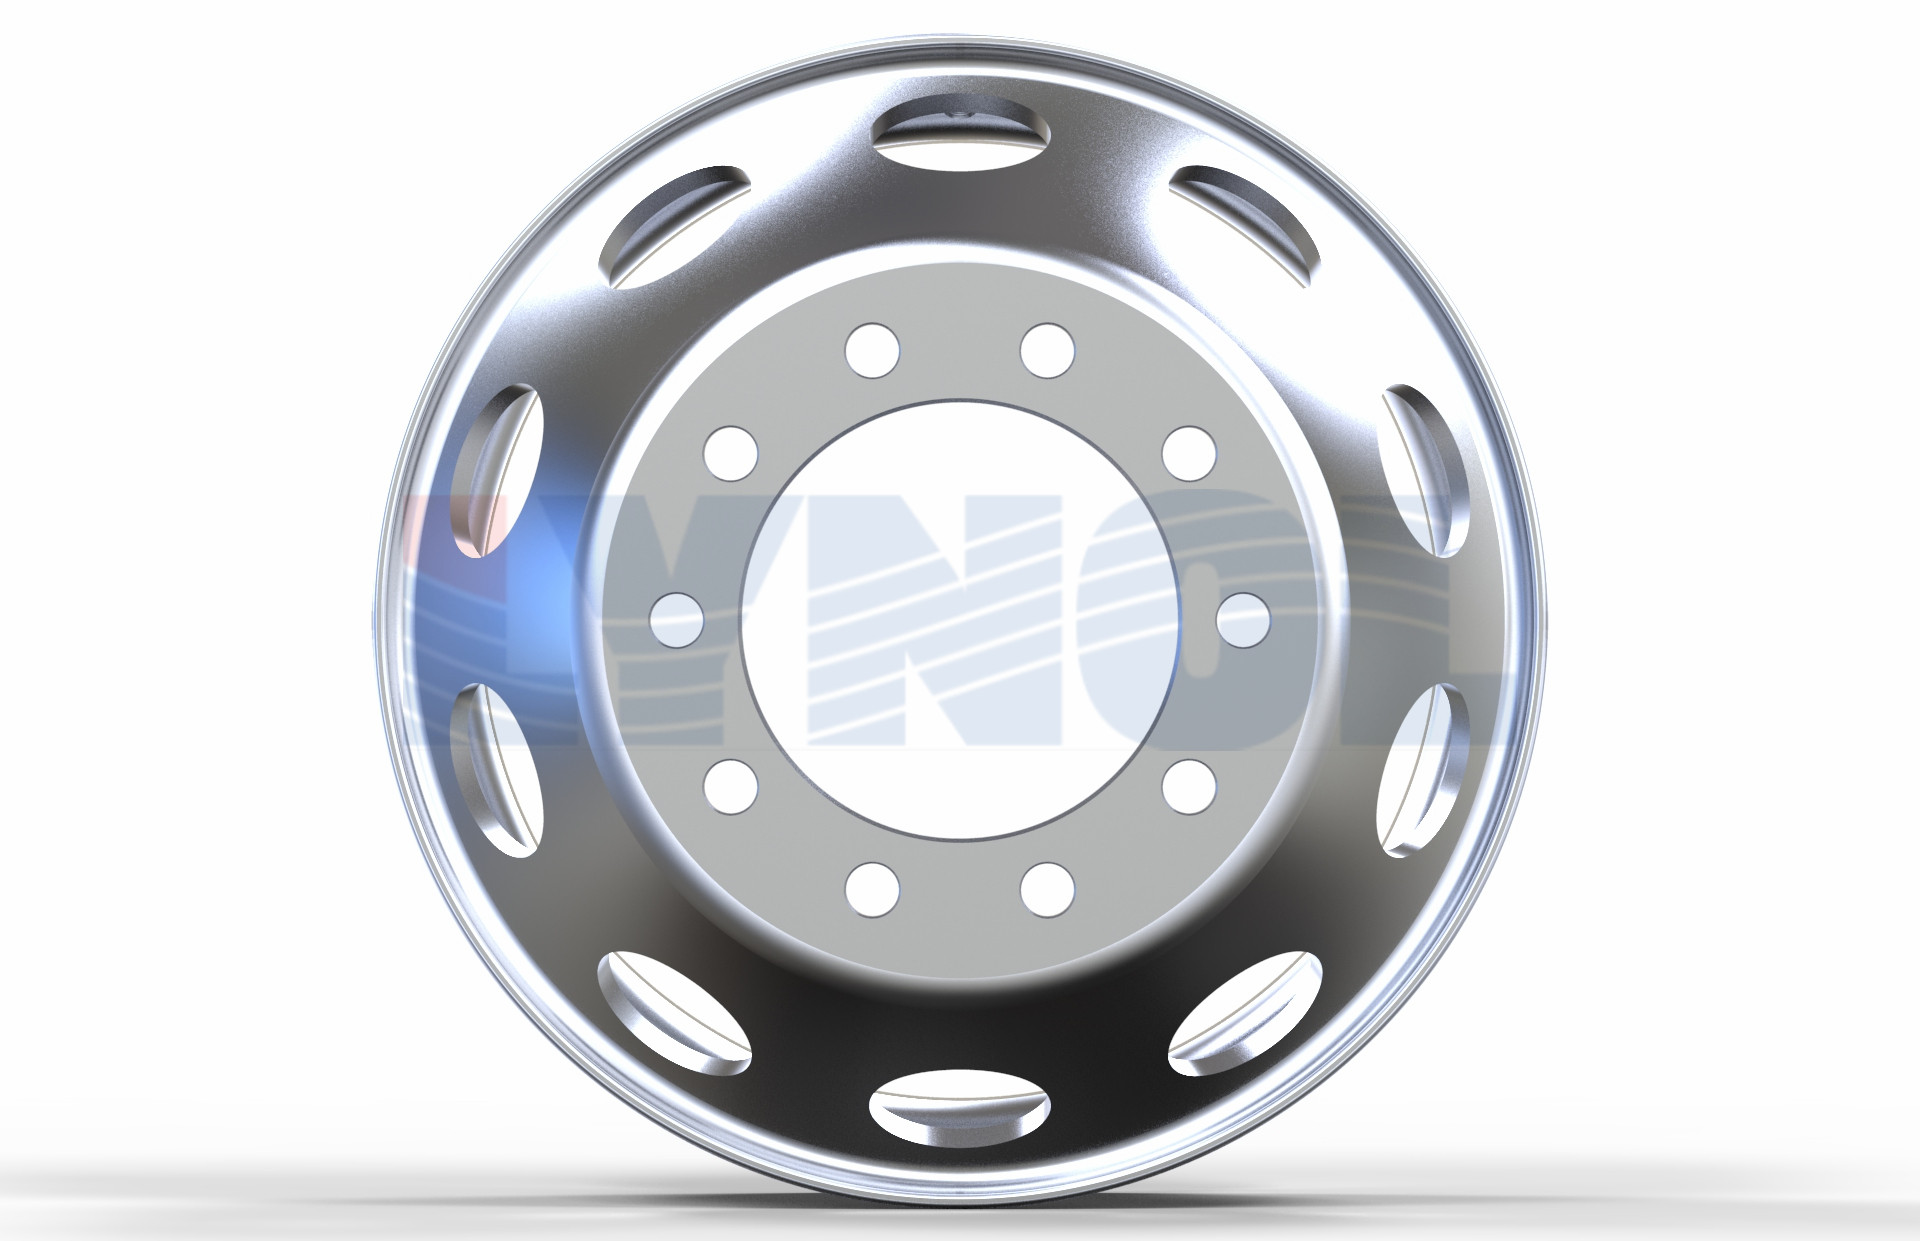 2800-007 - WHEEL - Truck Wheel 22.5X8.25 15 DC Hub   Piloted Both Sides Polished 6061-T6 Oval-Style